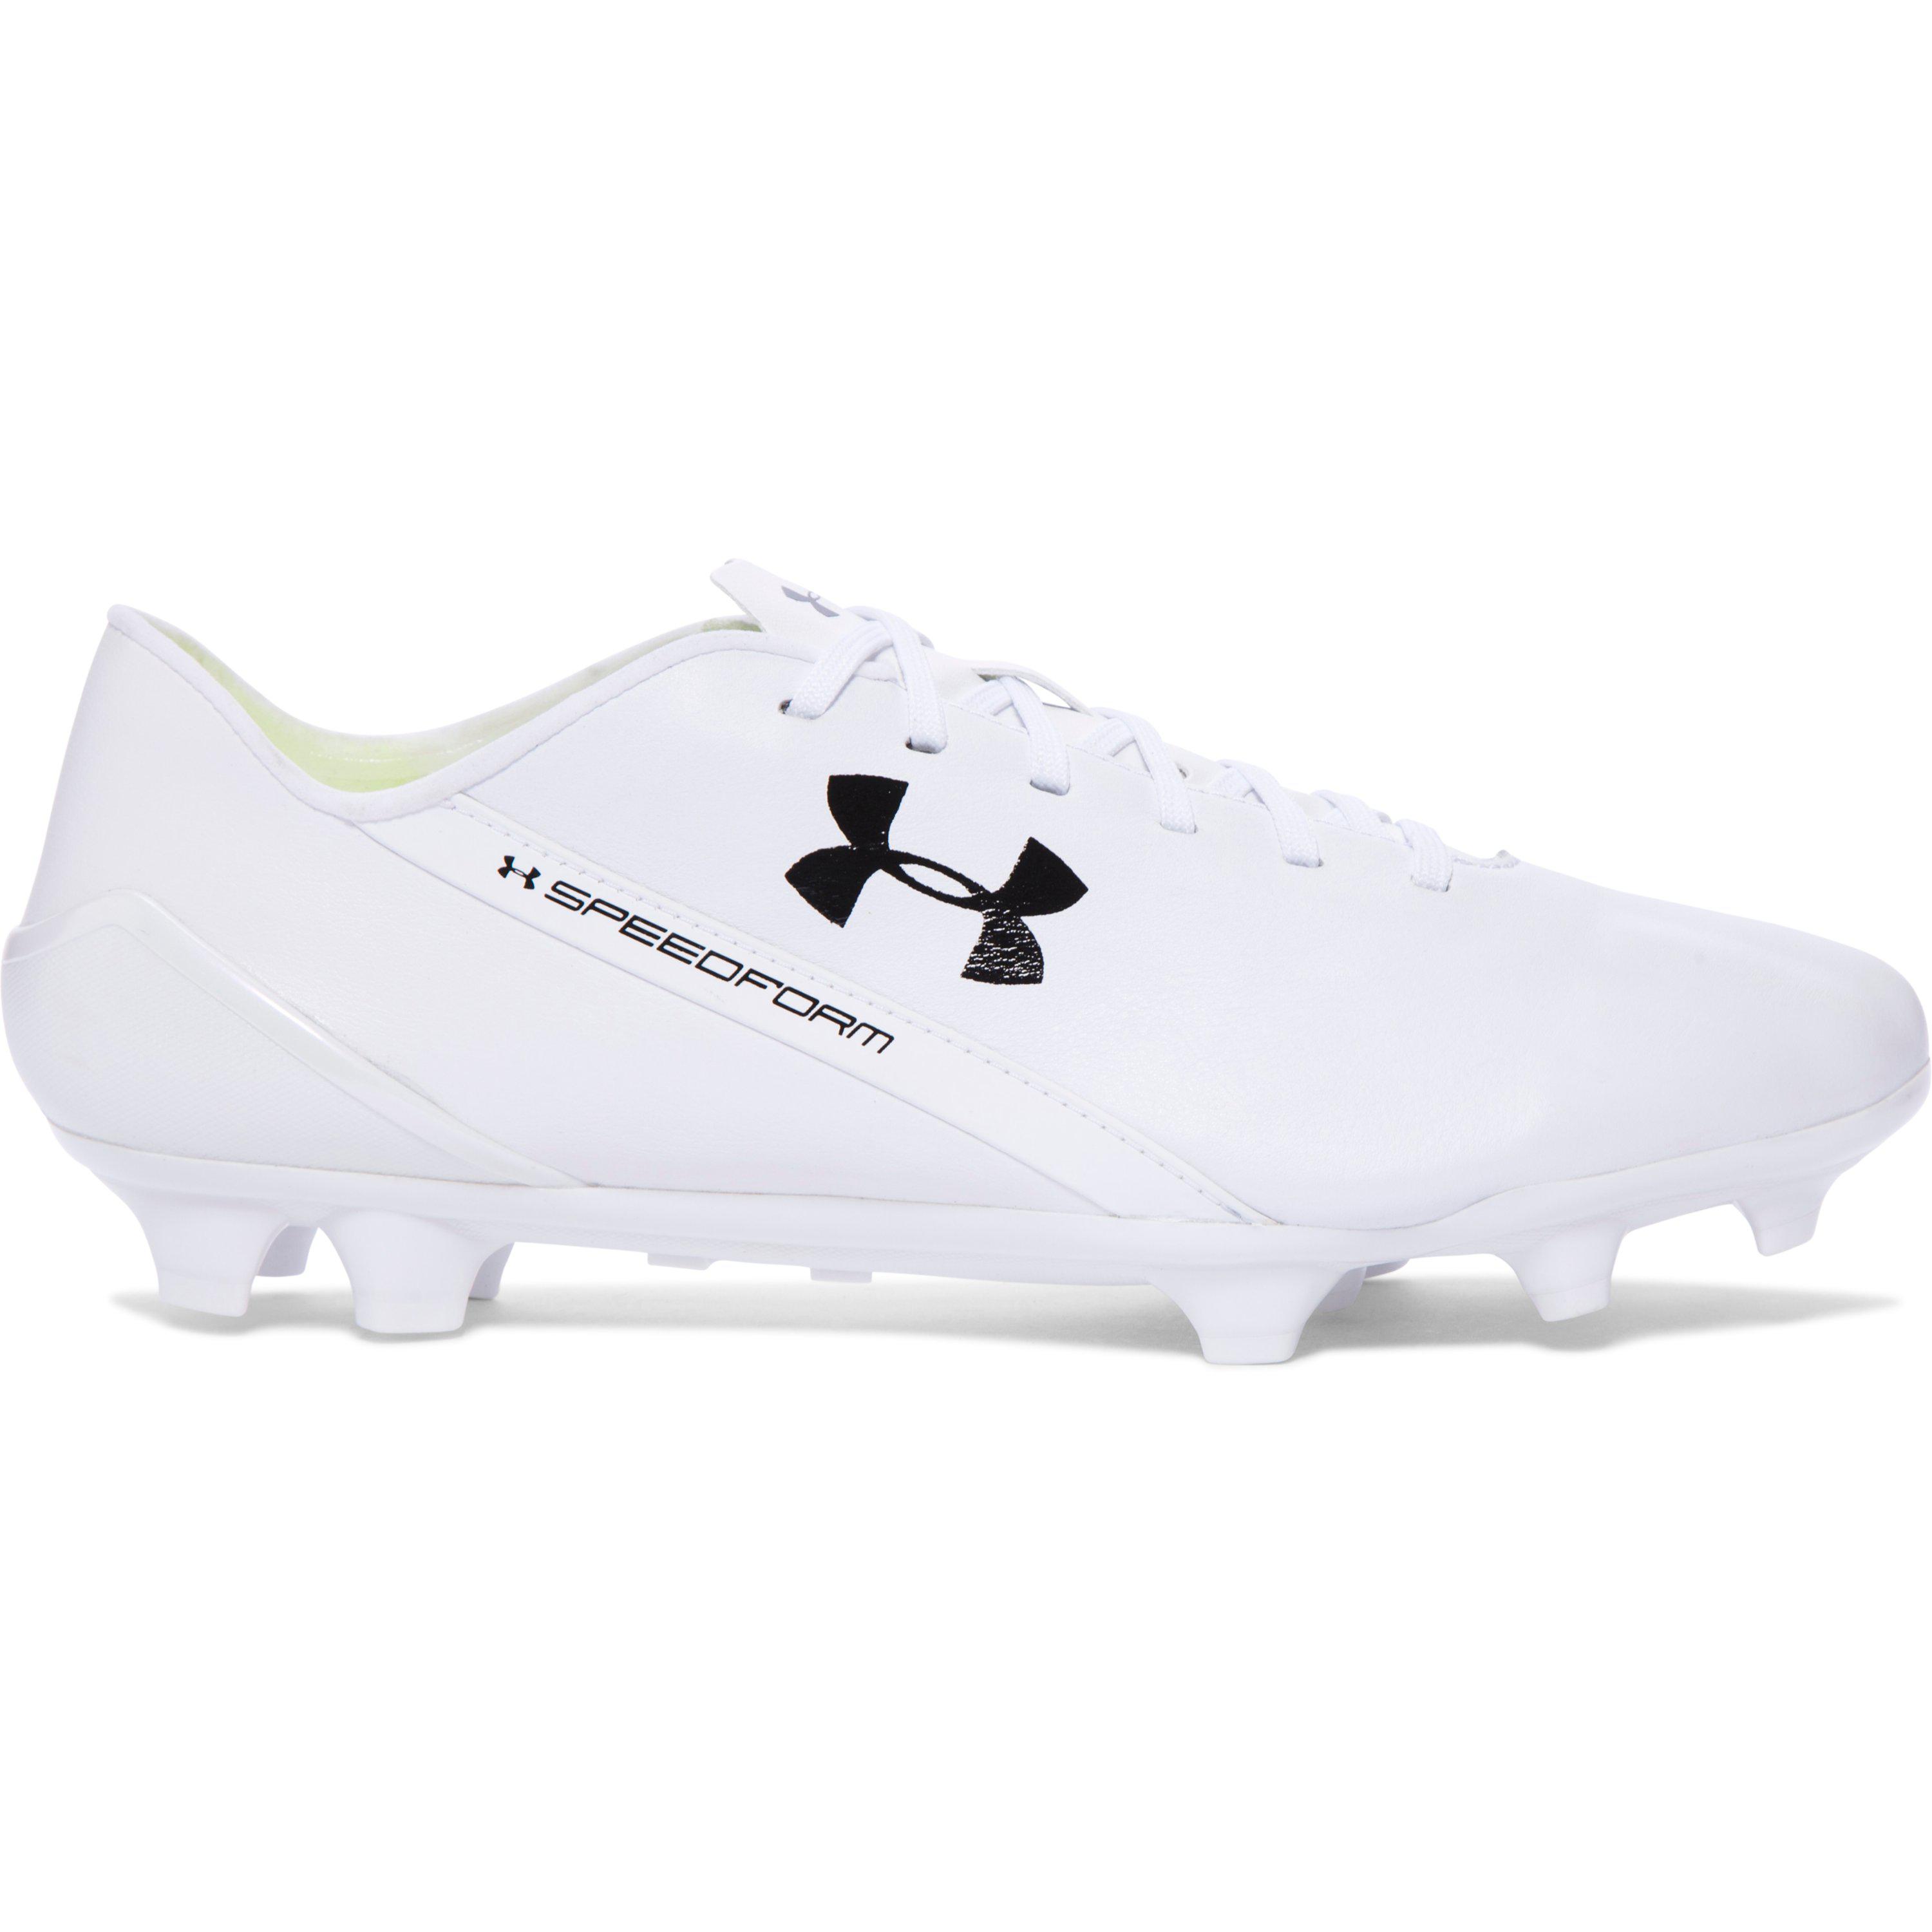 under armour speedform cleats soccer > Up to 72% OFF > In stock